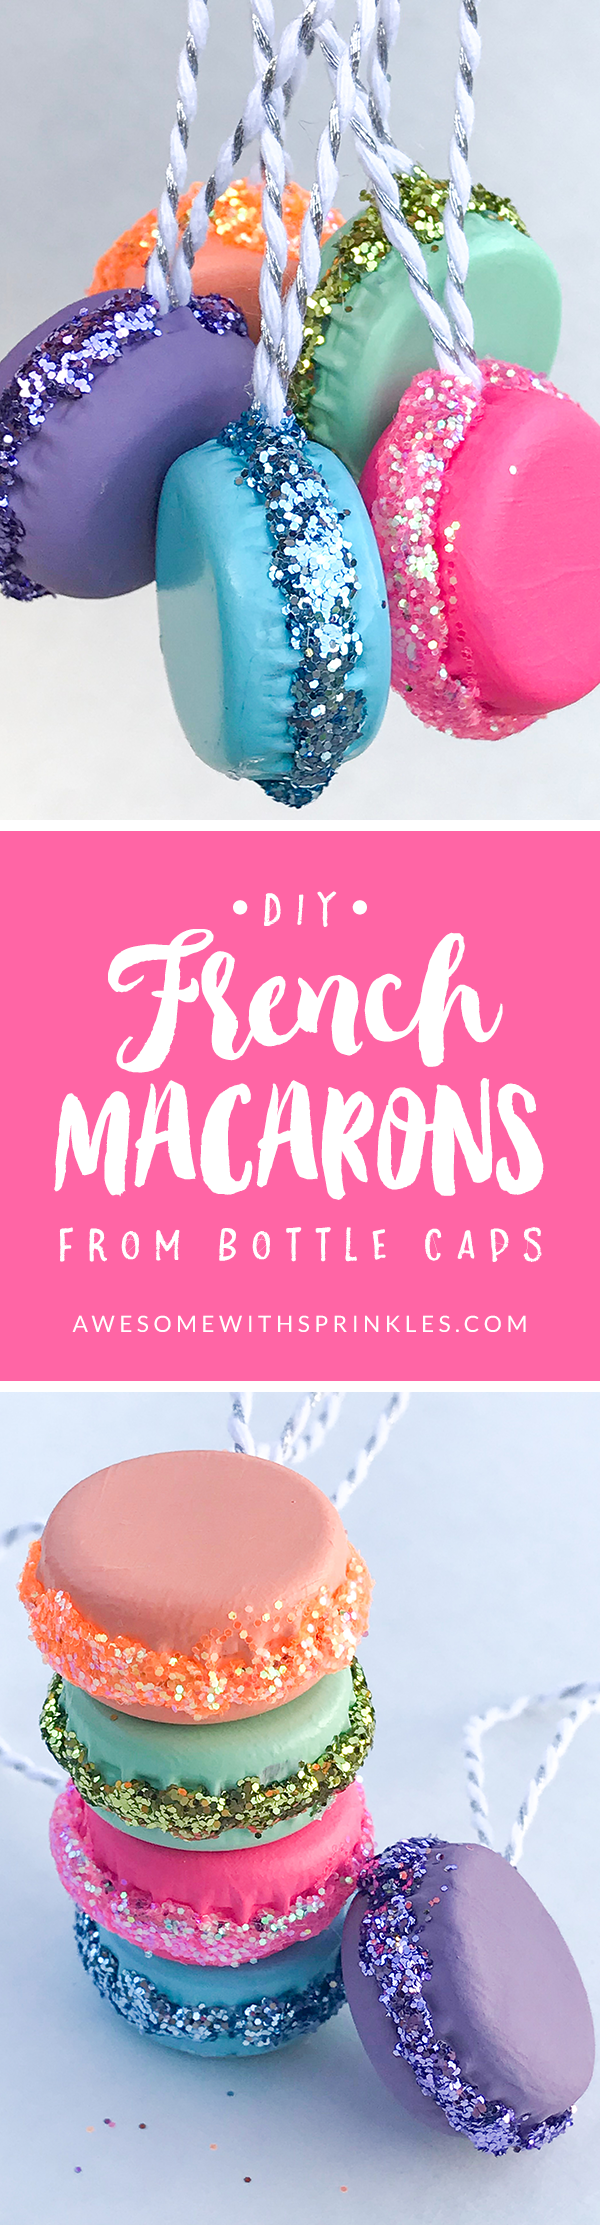 These adorable little french macaron ornaments are made from bottle caps. Make some for gifts, ornaments, present toppers, jewelry, key chains and more! | Awesome with Sprinkles